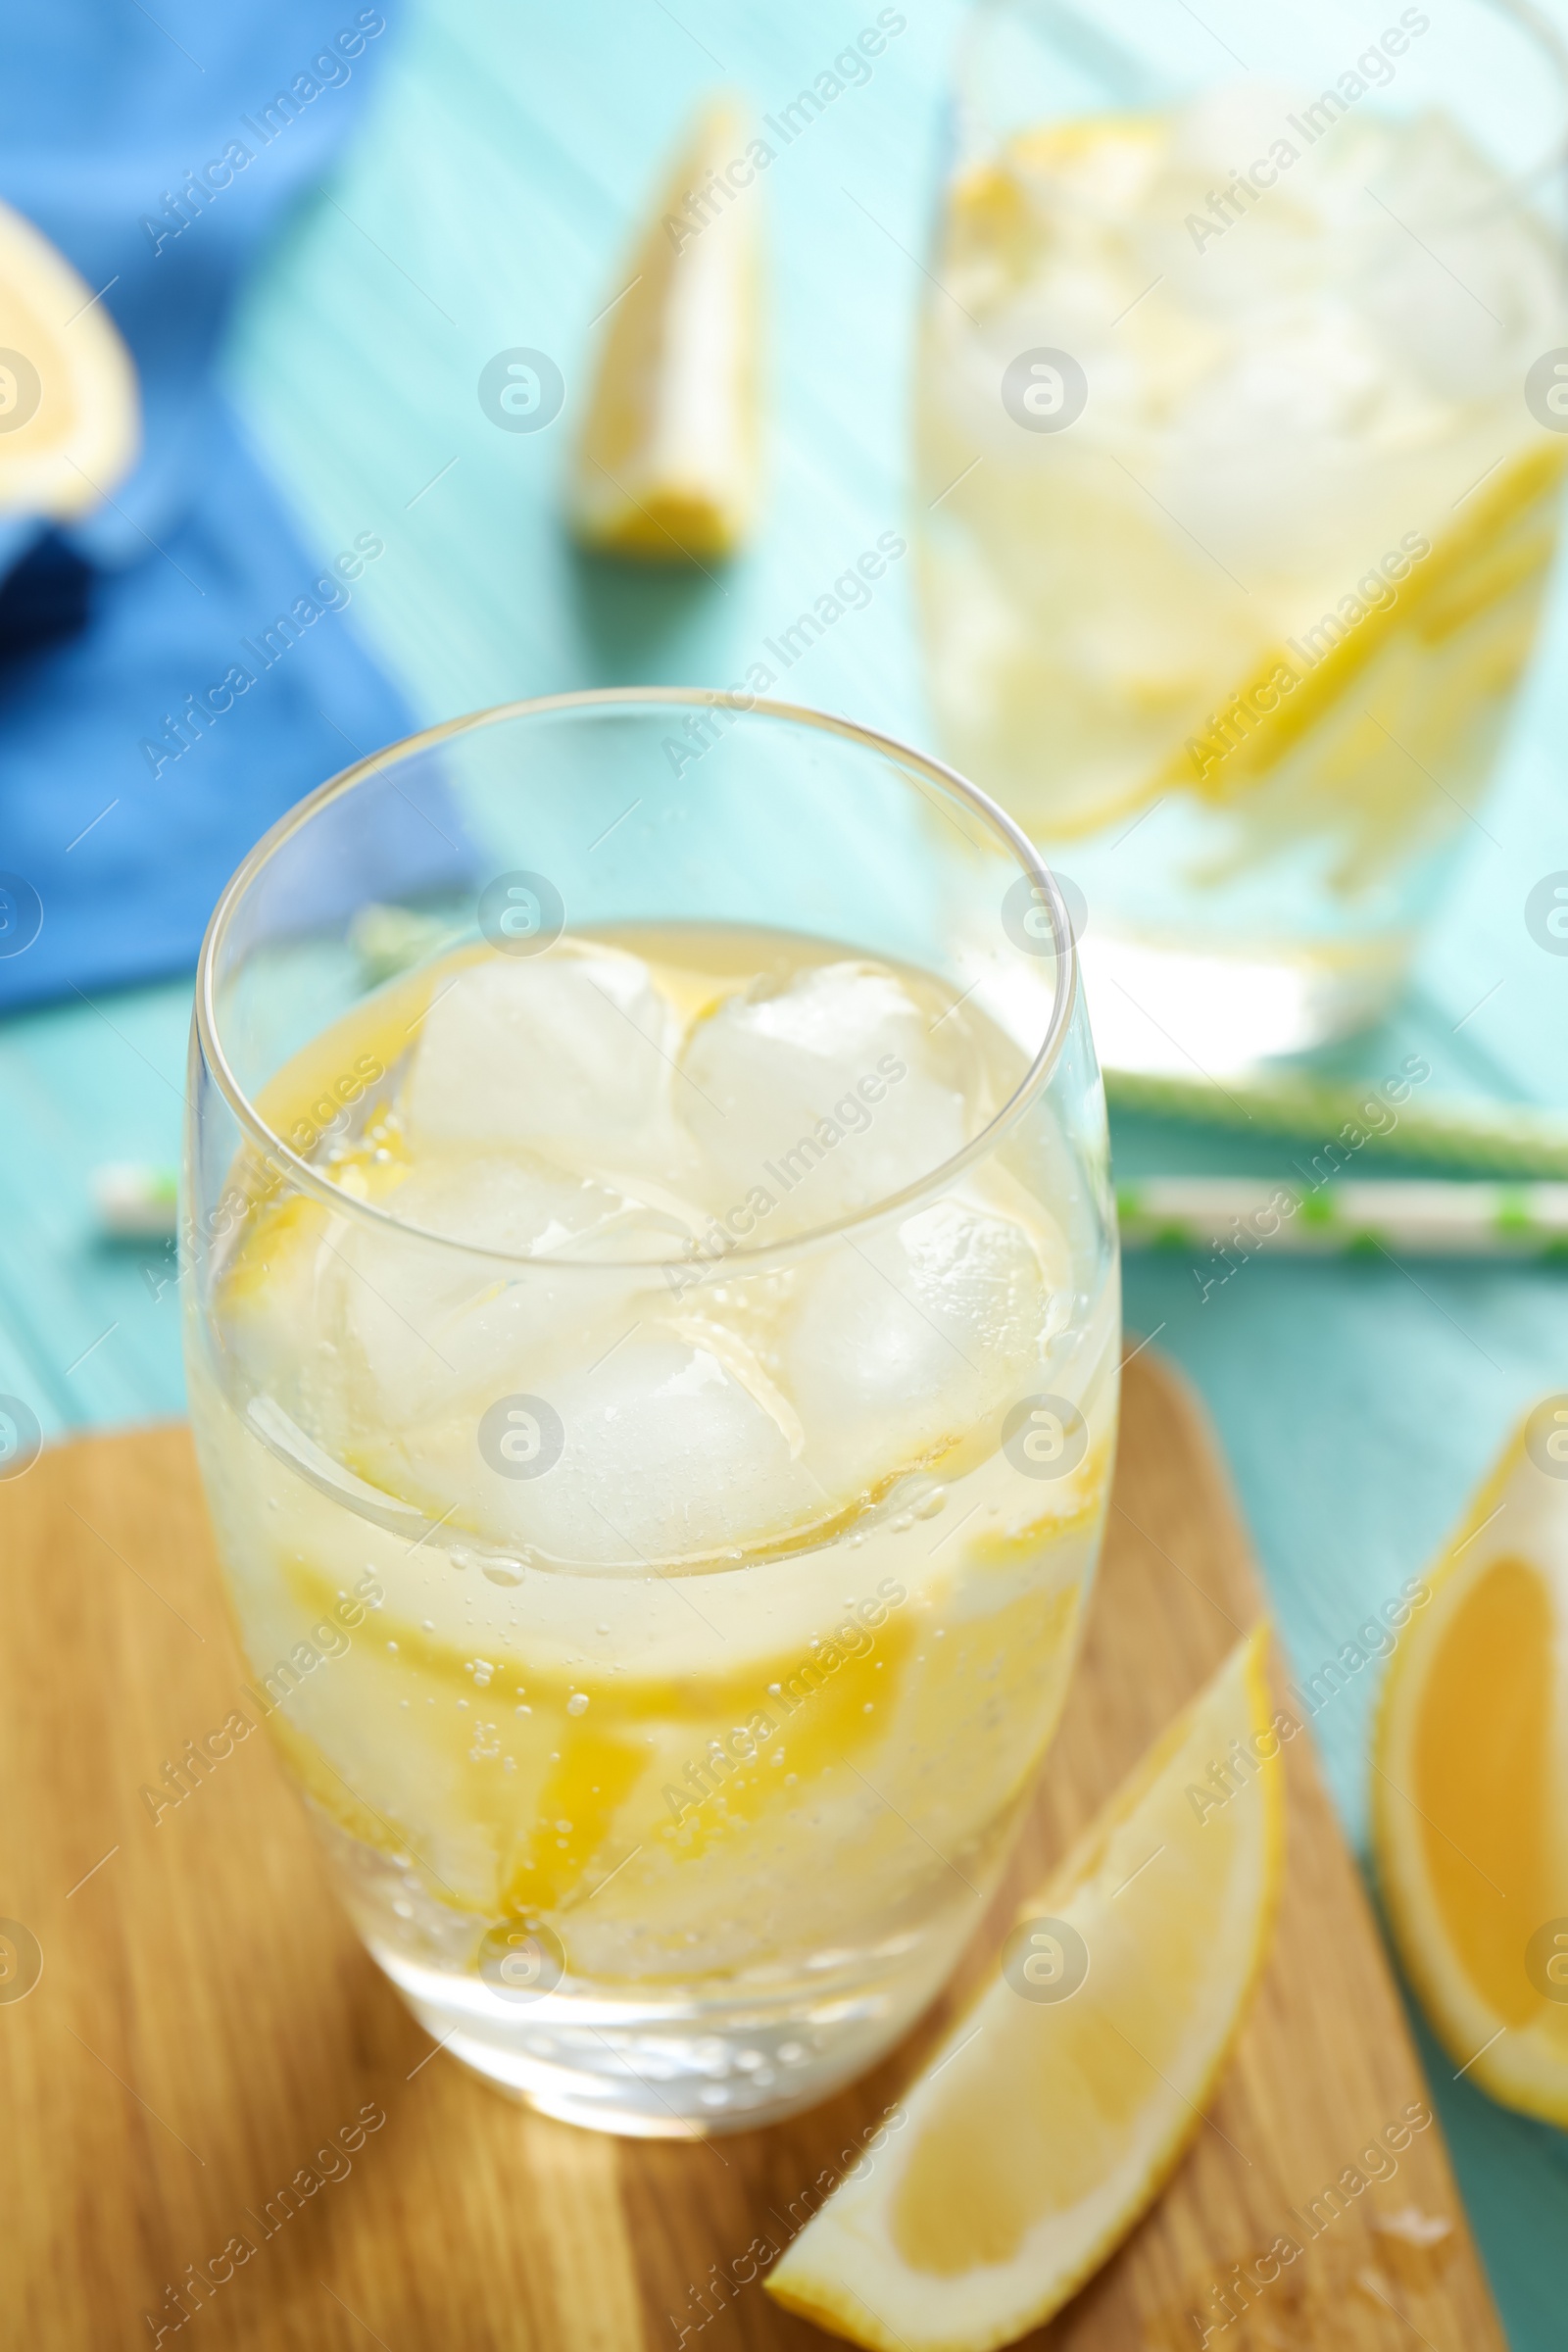 Photo of Soda water with lemon slices and ice cubes on light blue wooden table